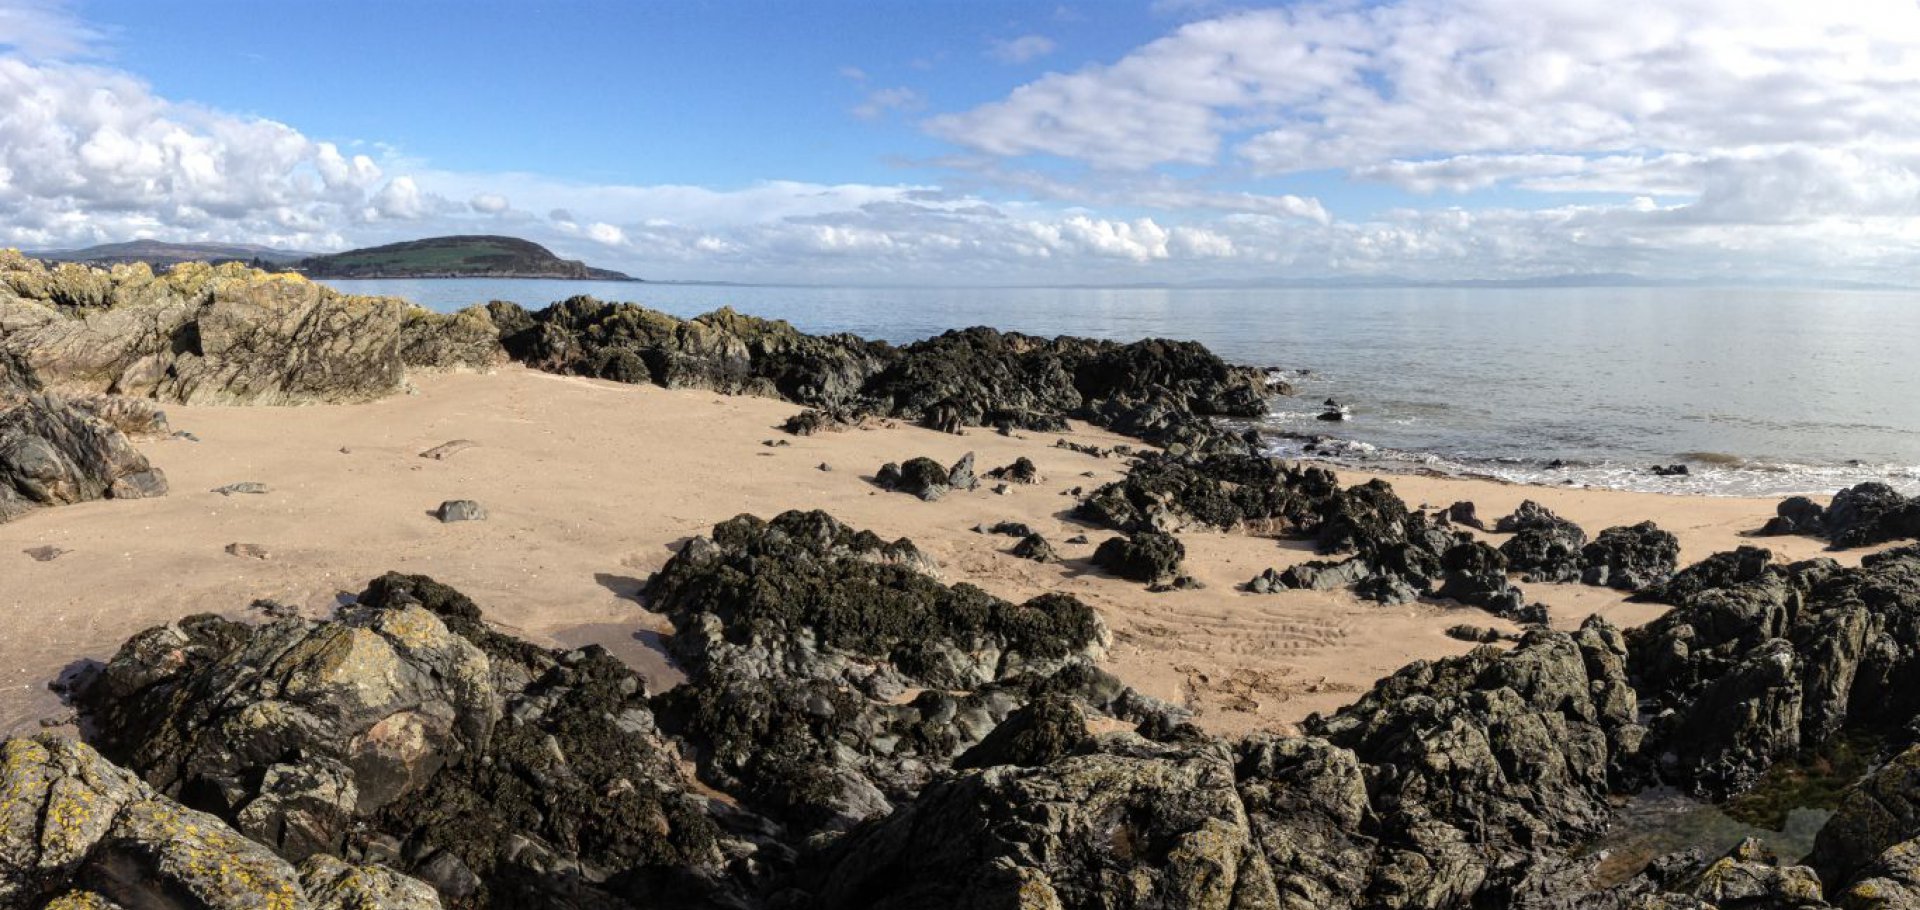 The Solway Coast is a great place for spring walks -see our last minute special offers